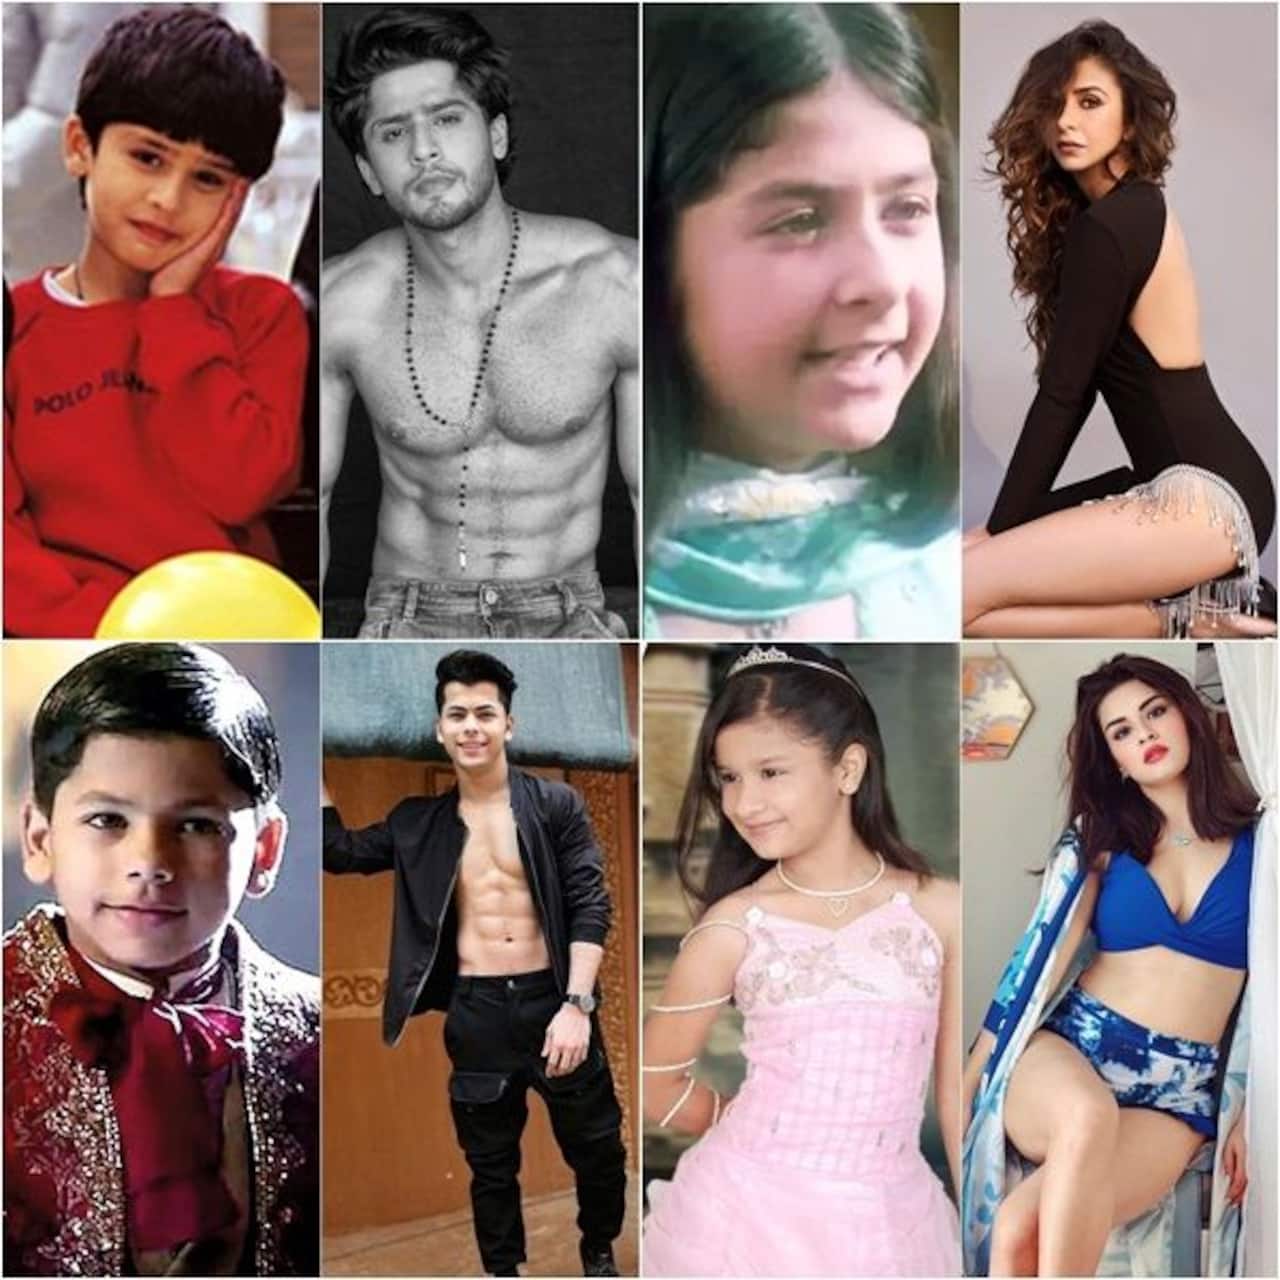 Before-after transformation of child actors is awe-inspiring